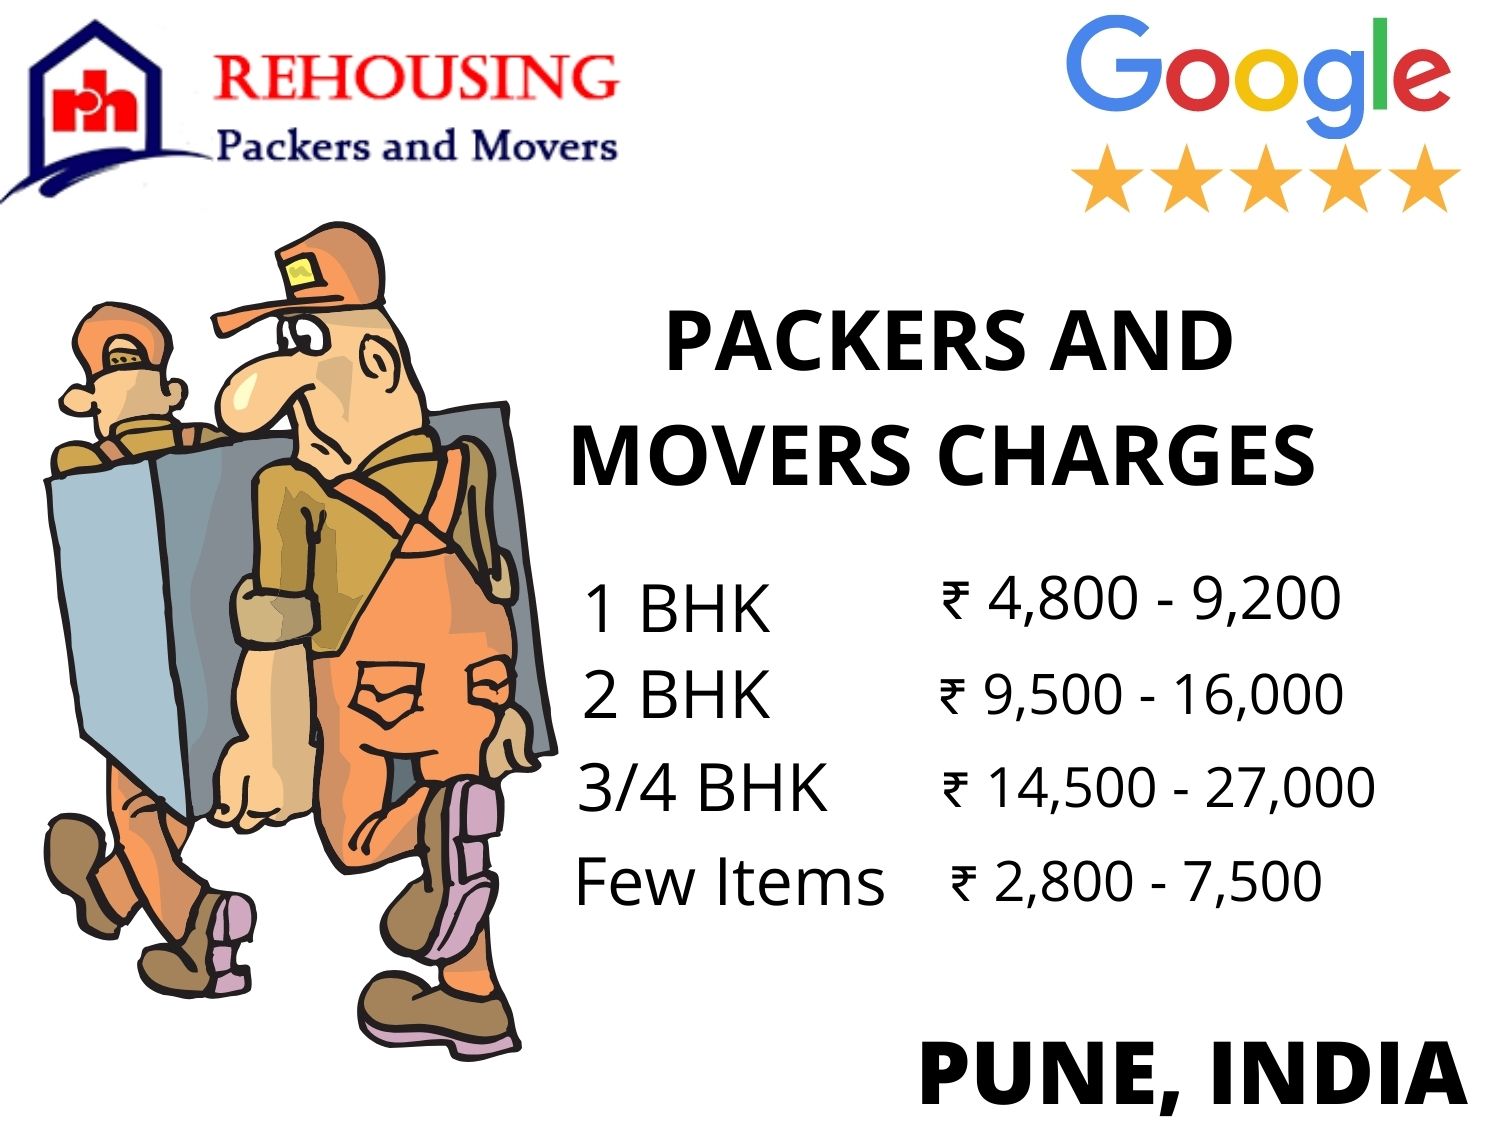 Packers and movers Charges in Pune |Rates Rehousing